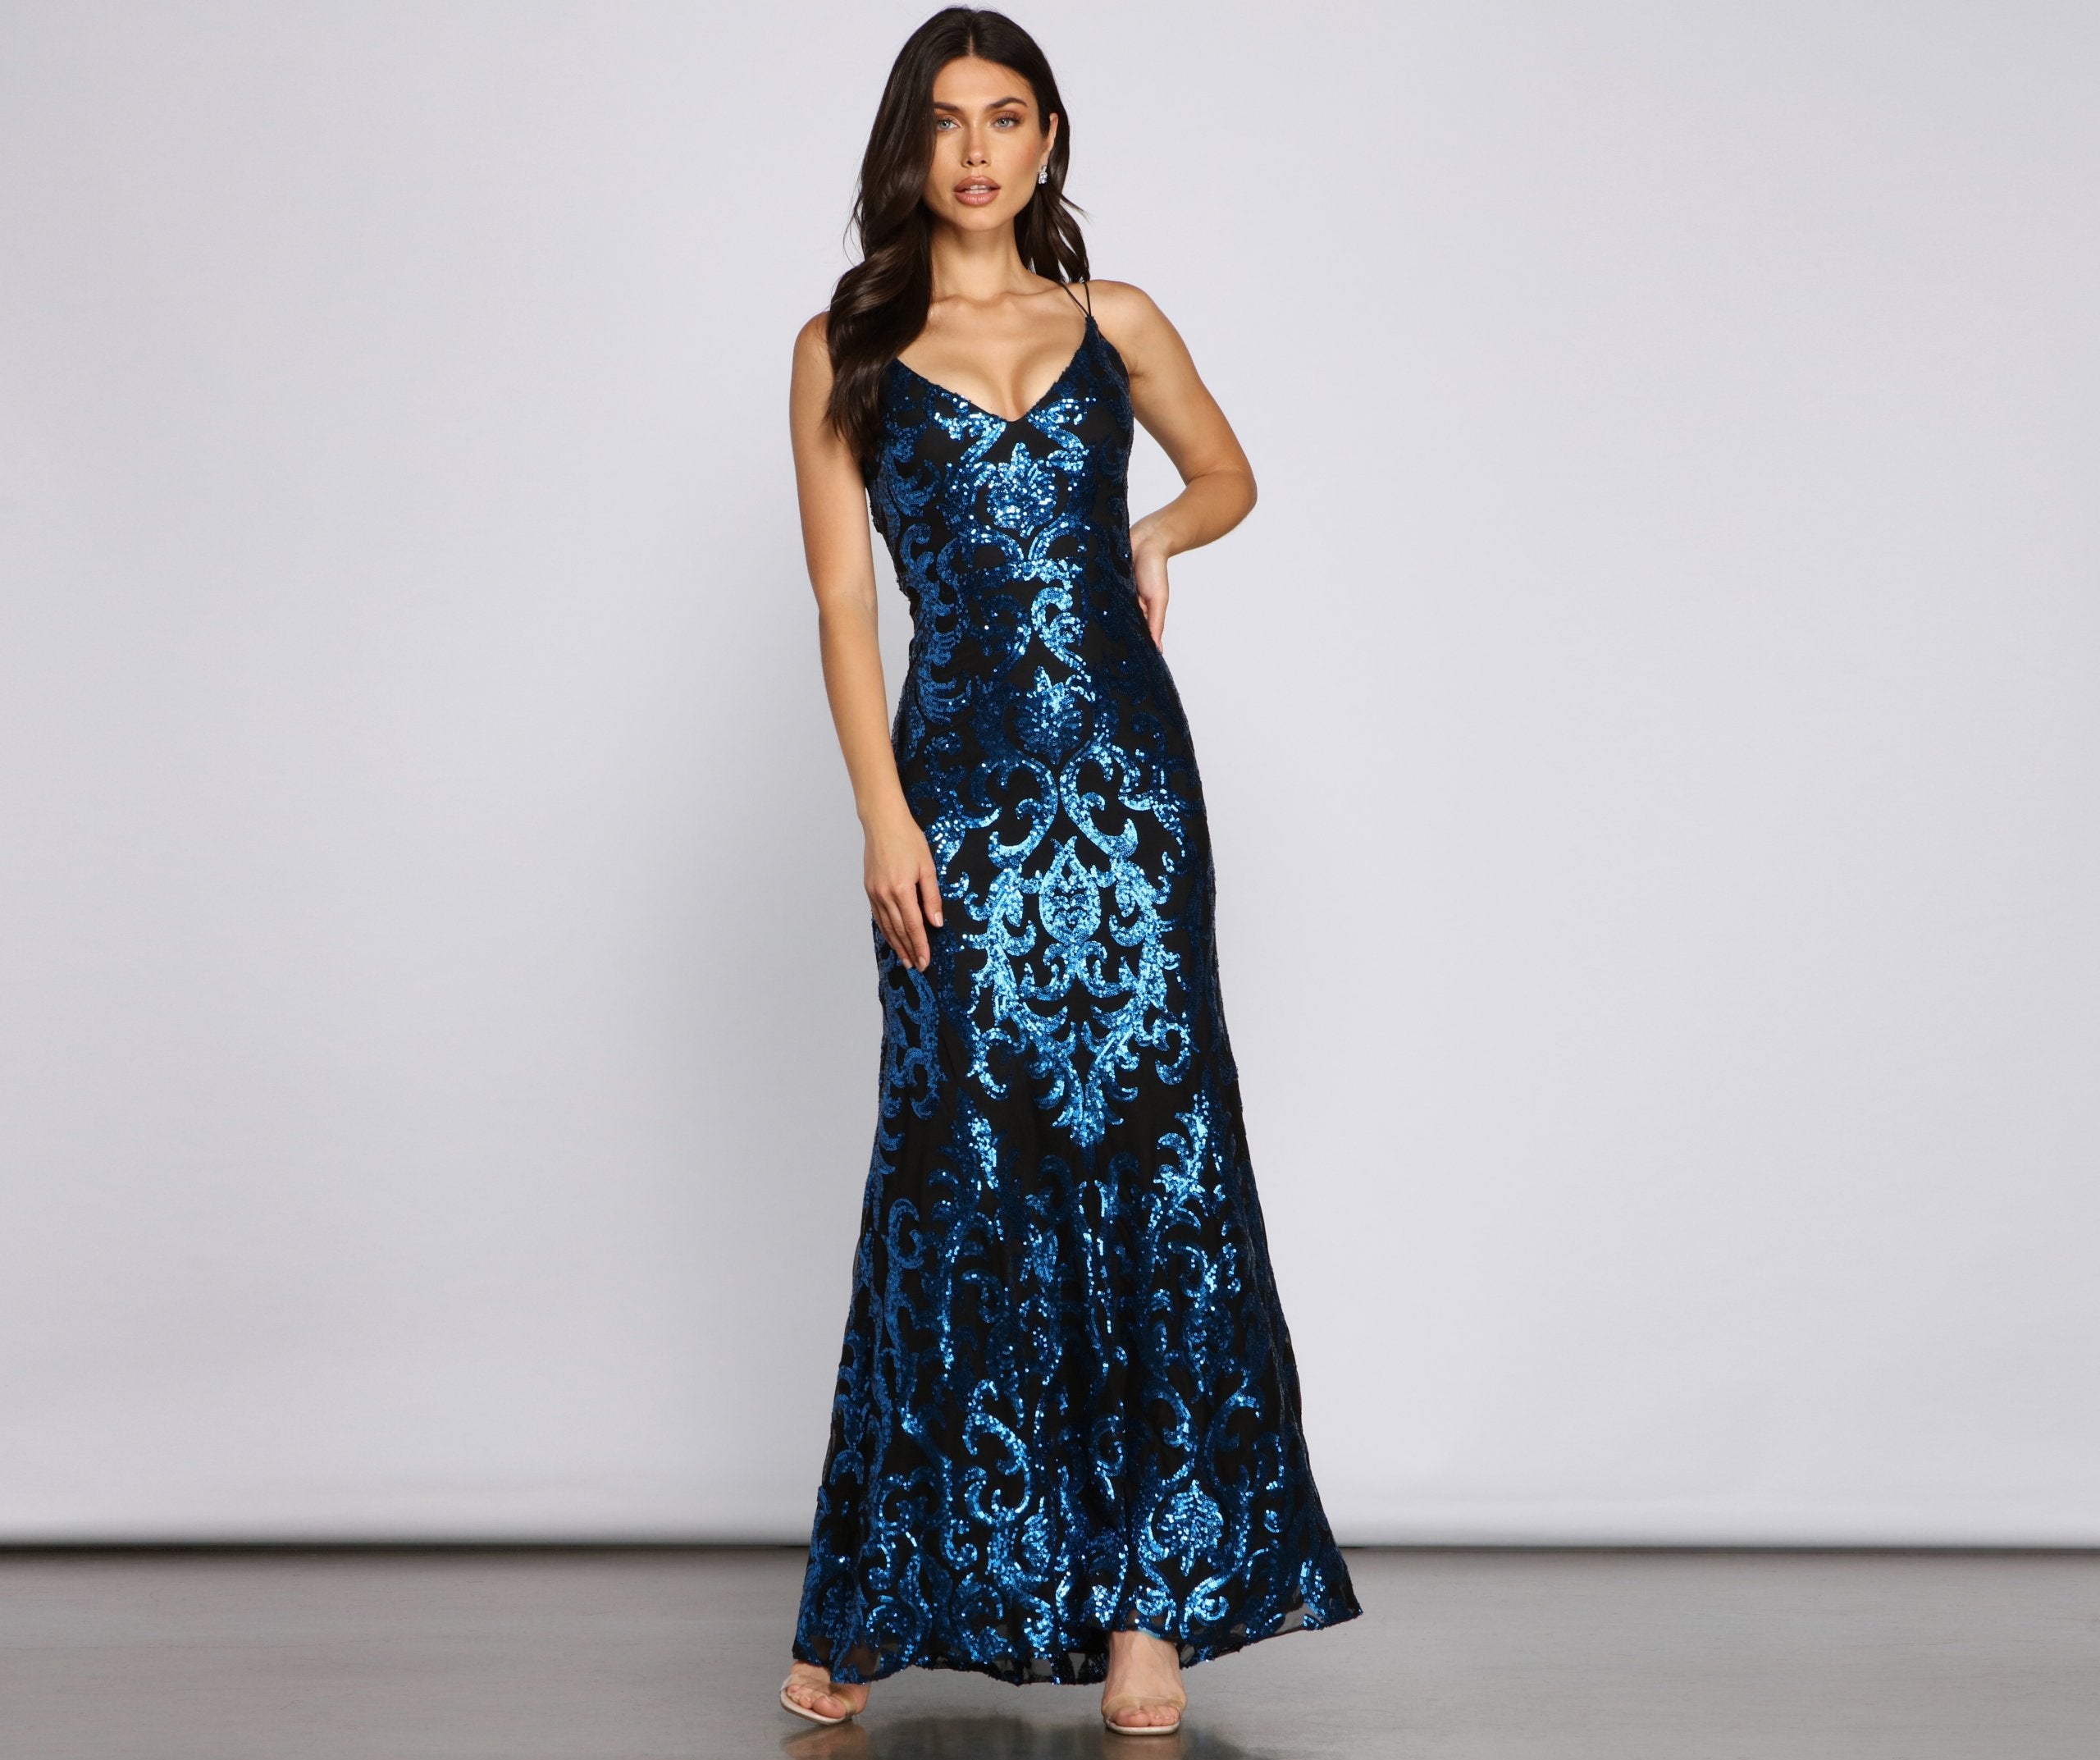 Sequined Dress with Low-cut Back - Dark blue - Ladies